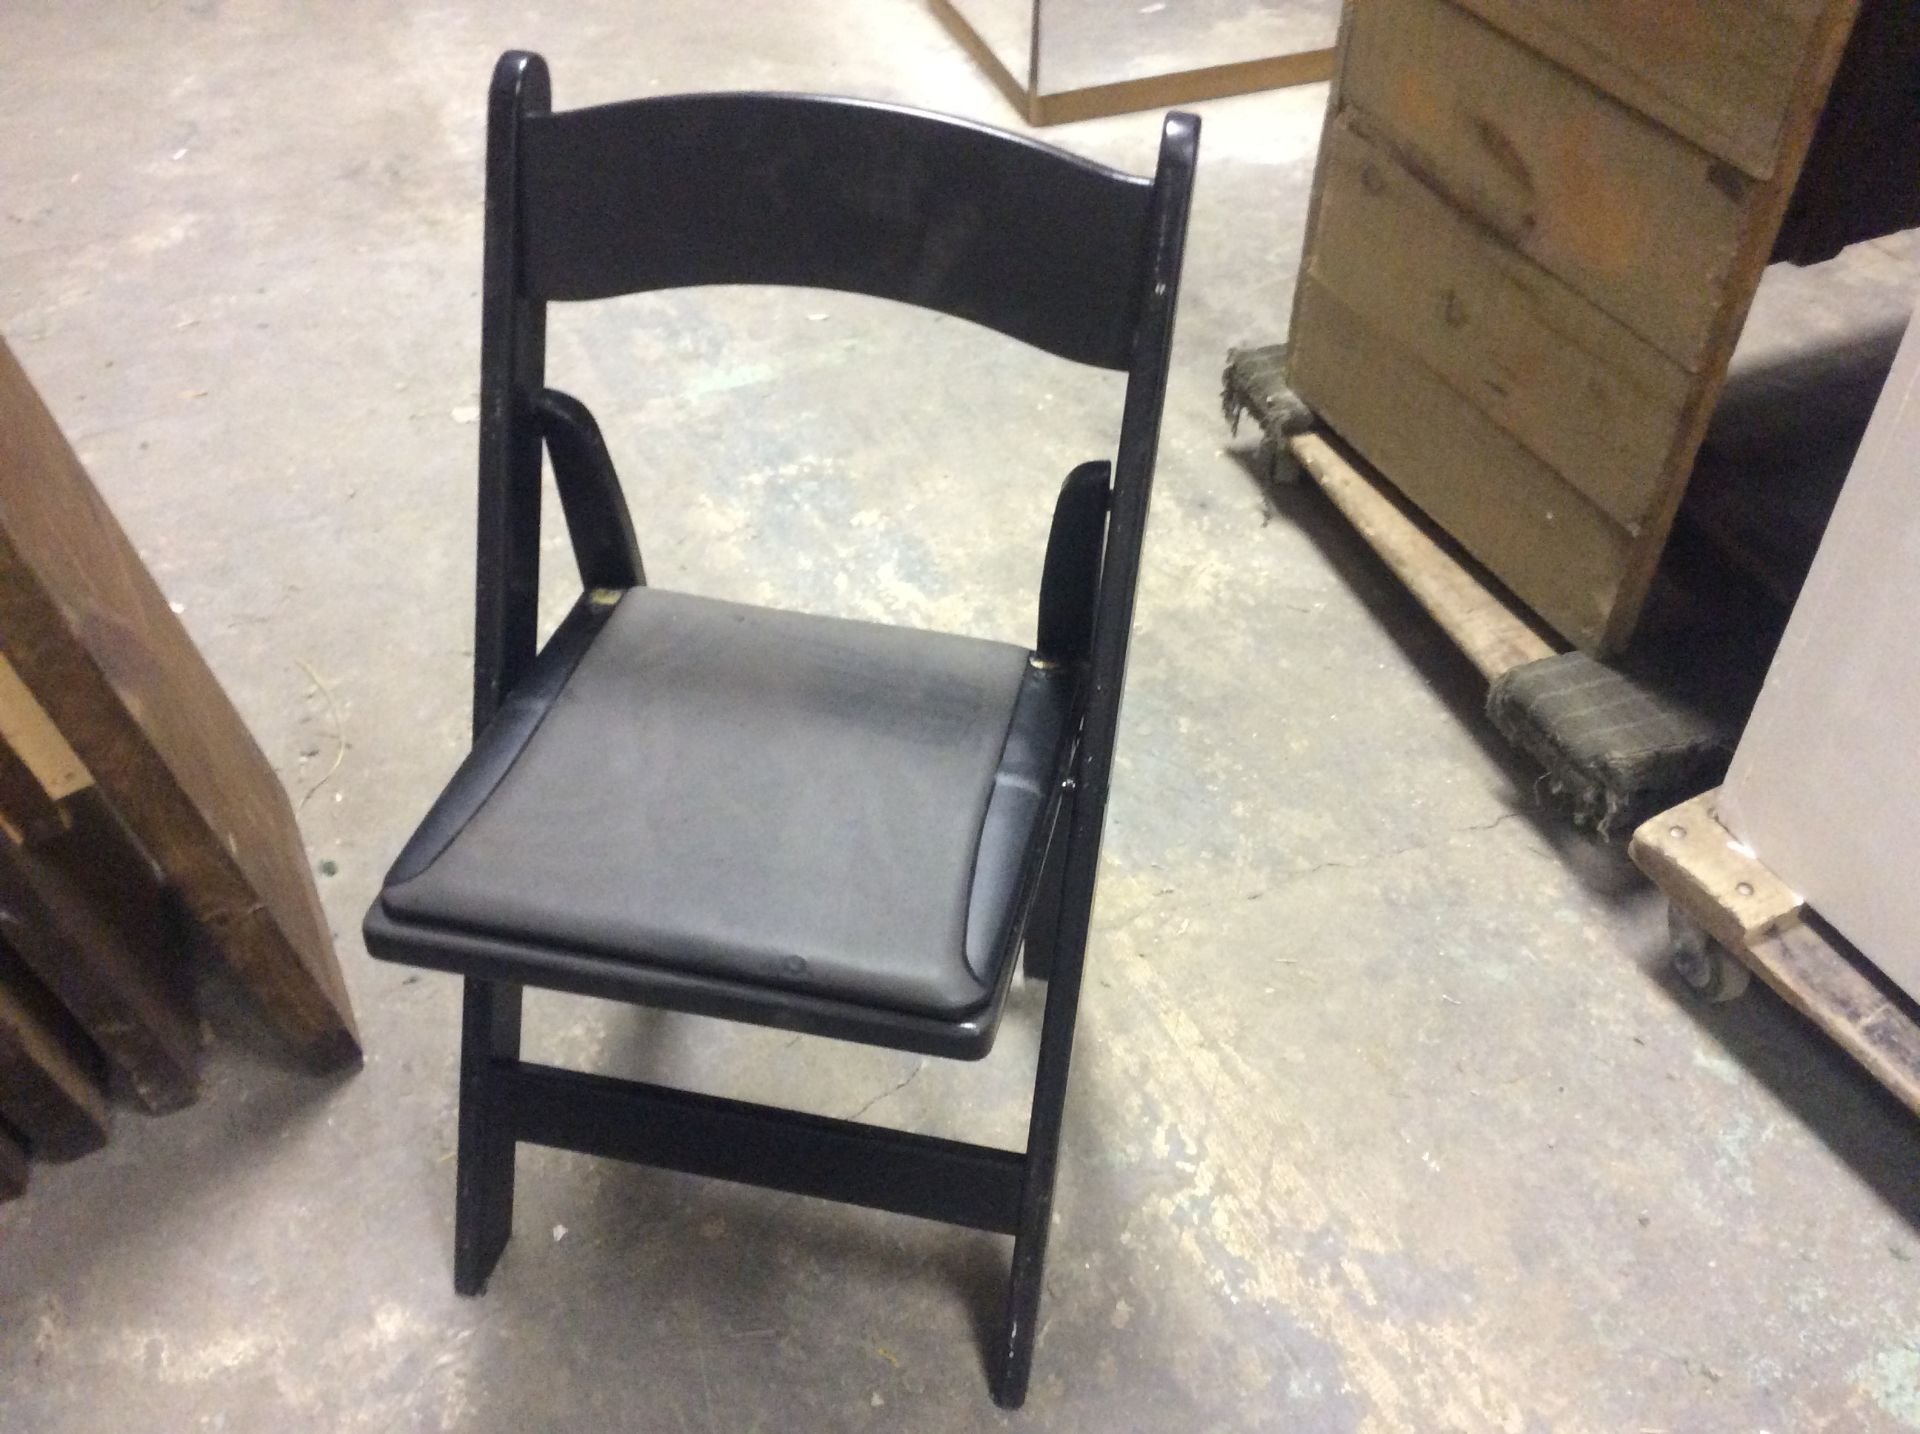 BLACK FOLDING CHAIRS 100 PIECES SUBJECT TO COUNT